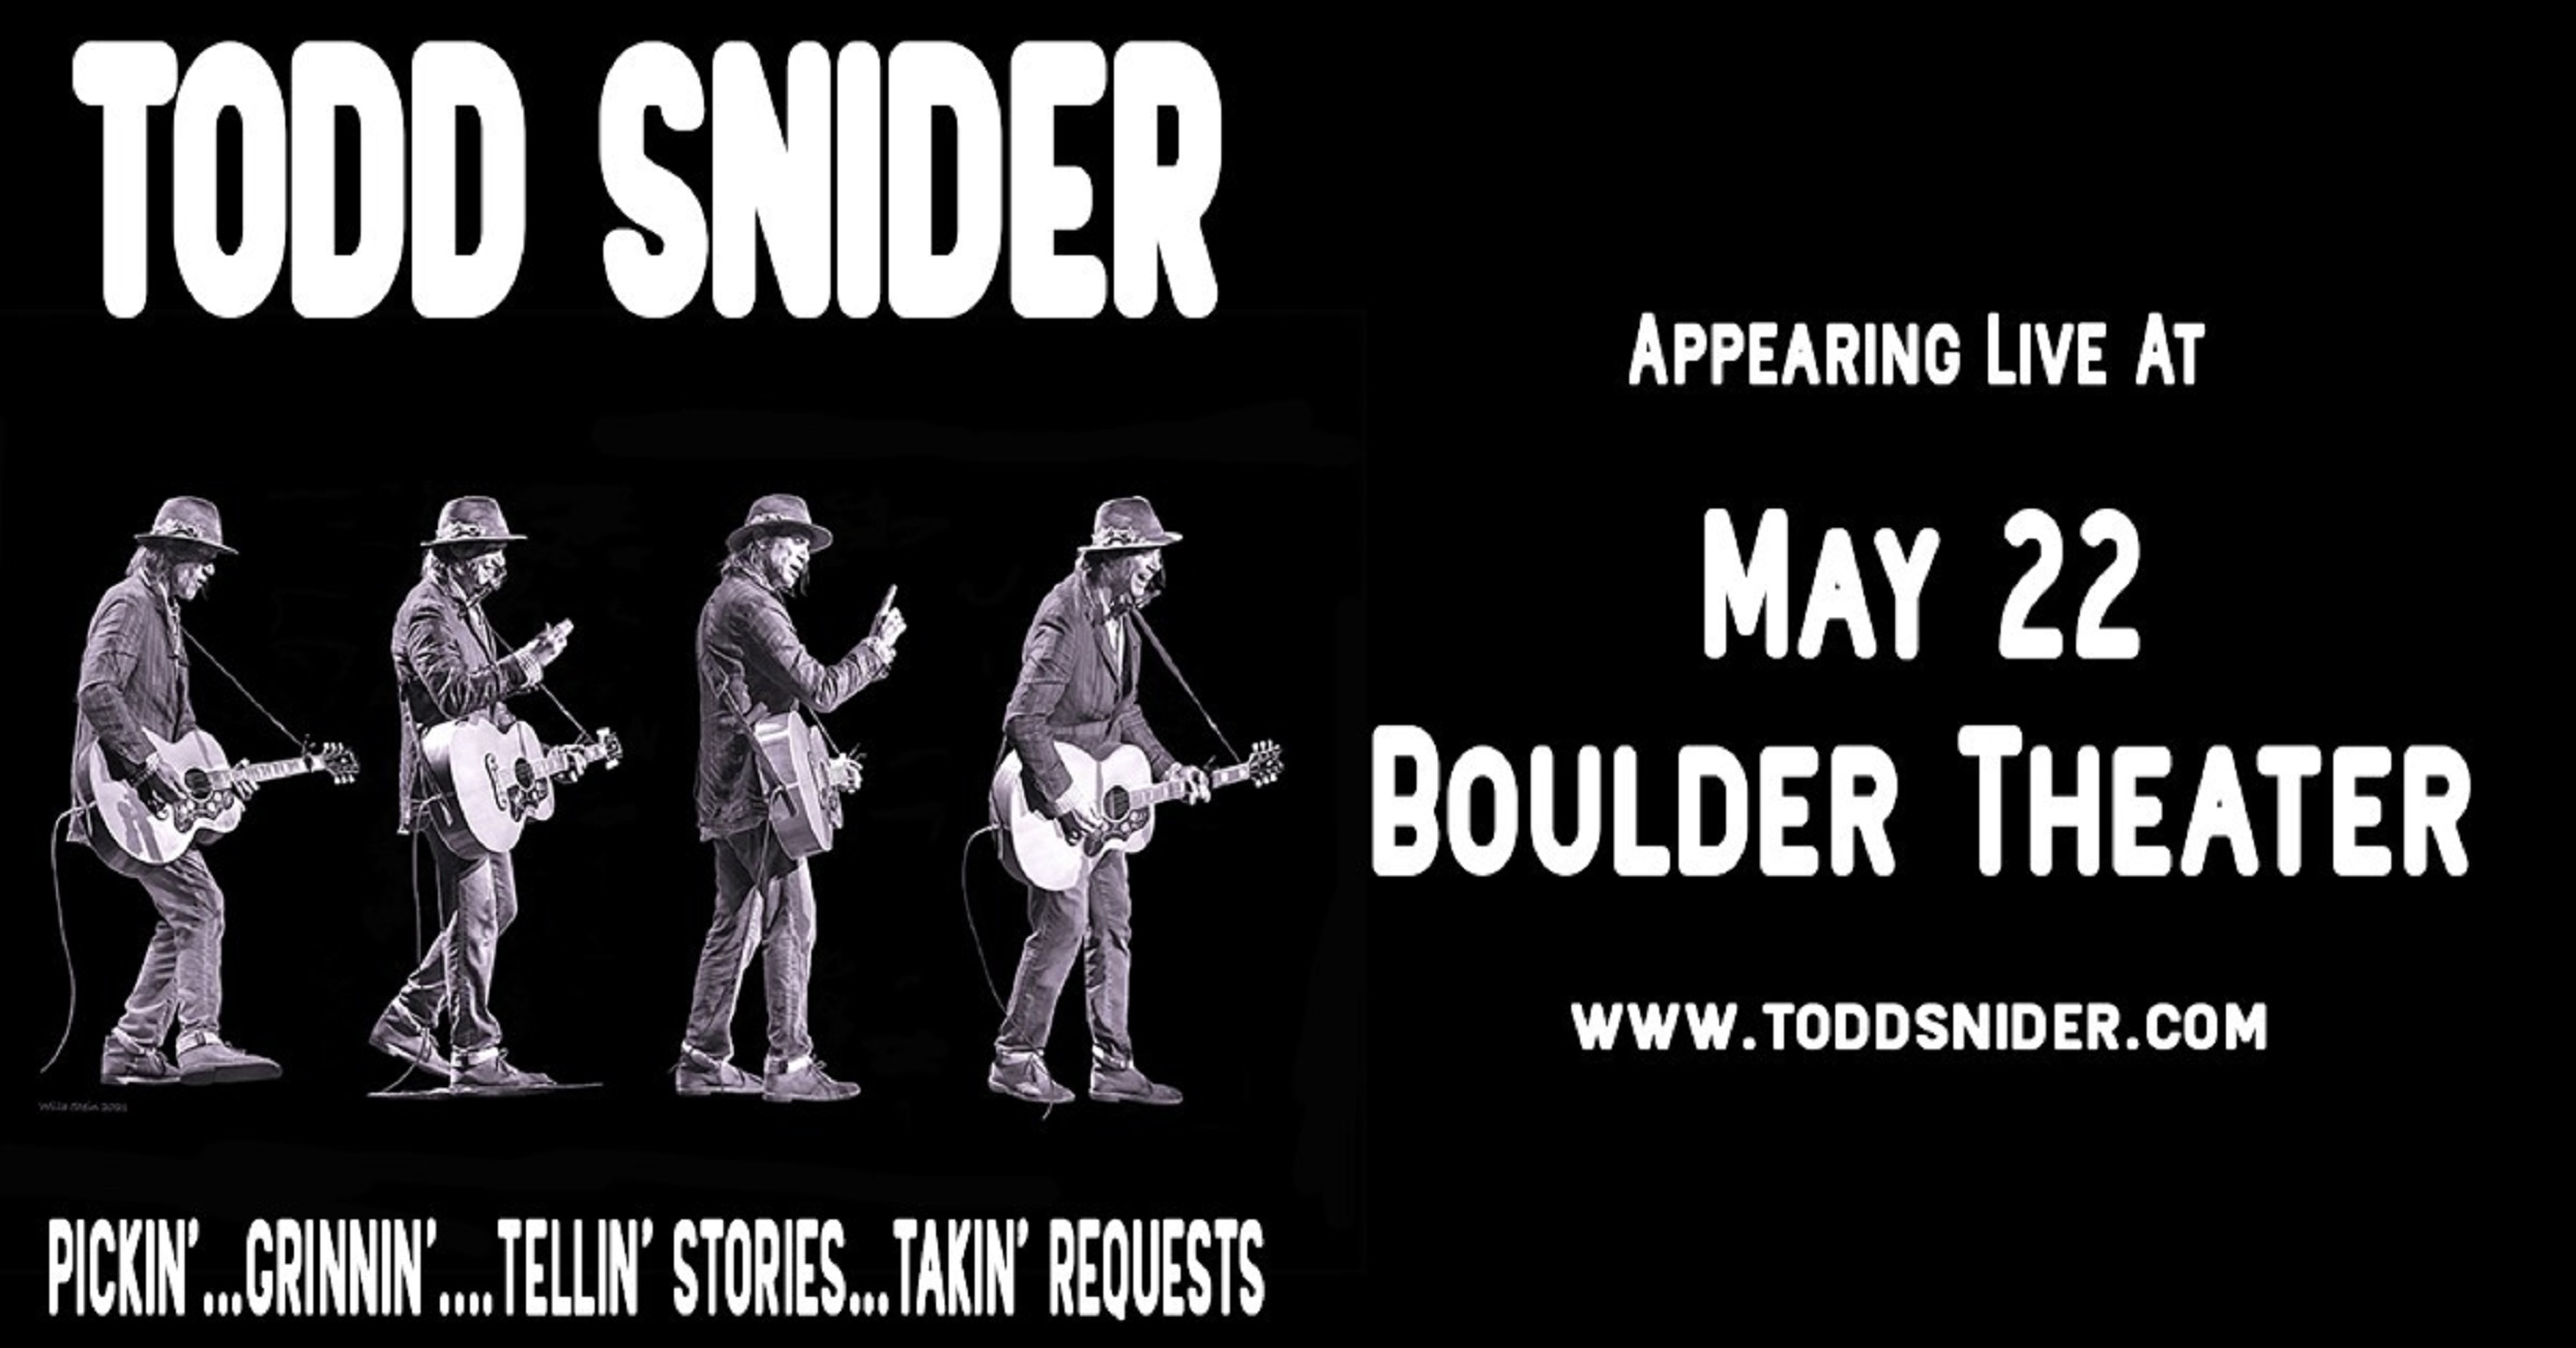 Todd Snider will play Boulder Theater May 22nd, 2022